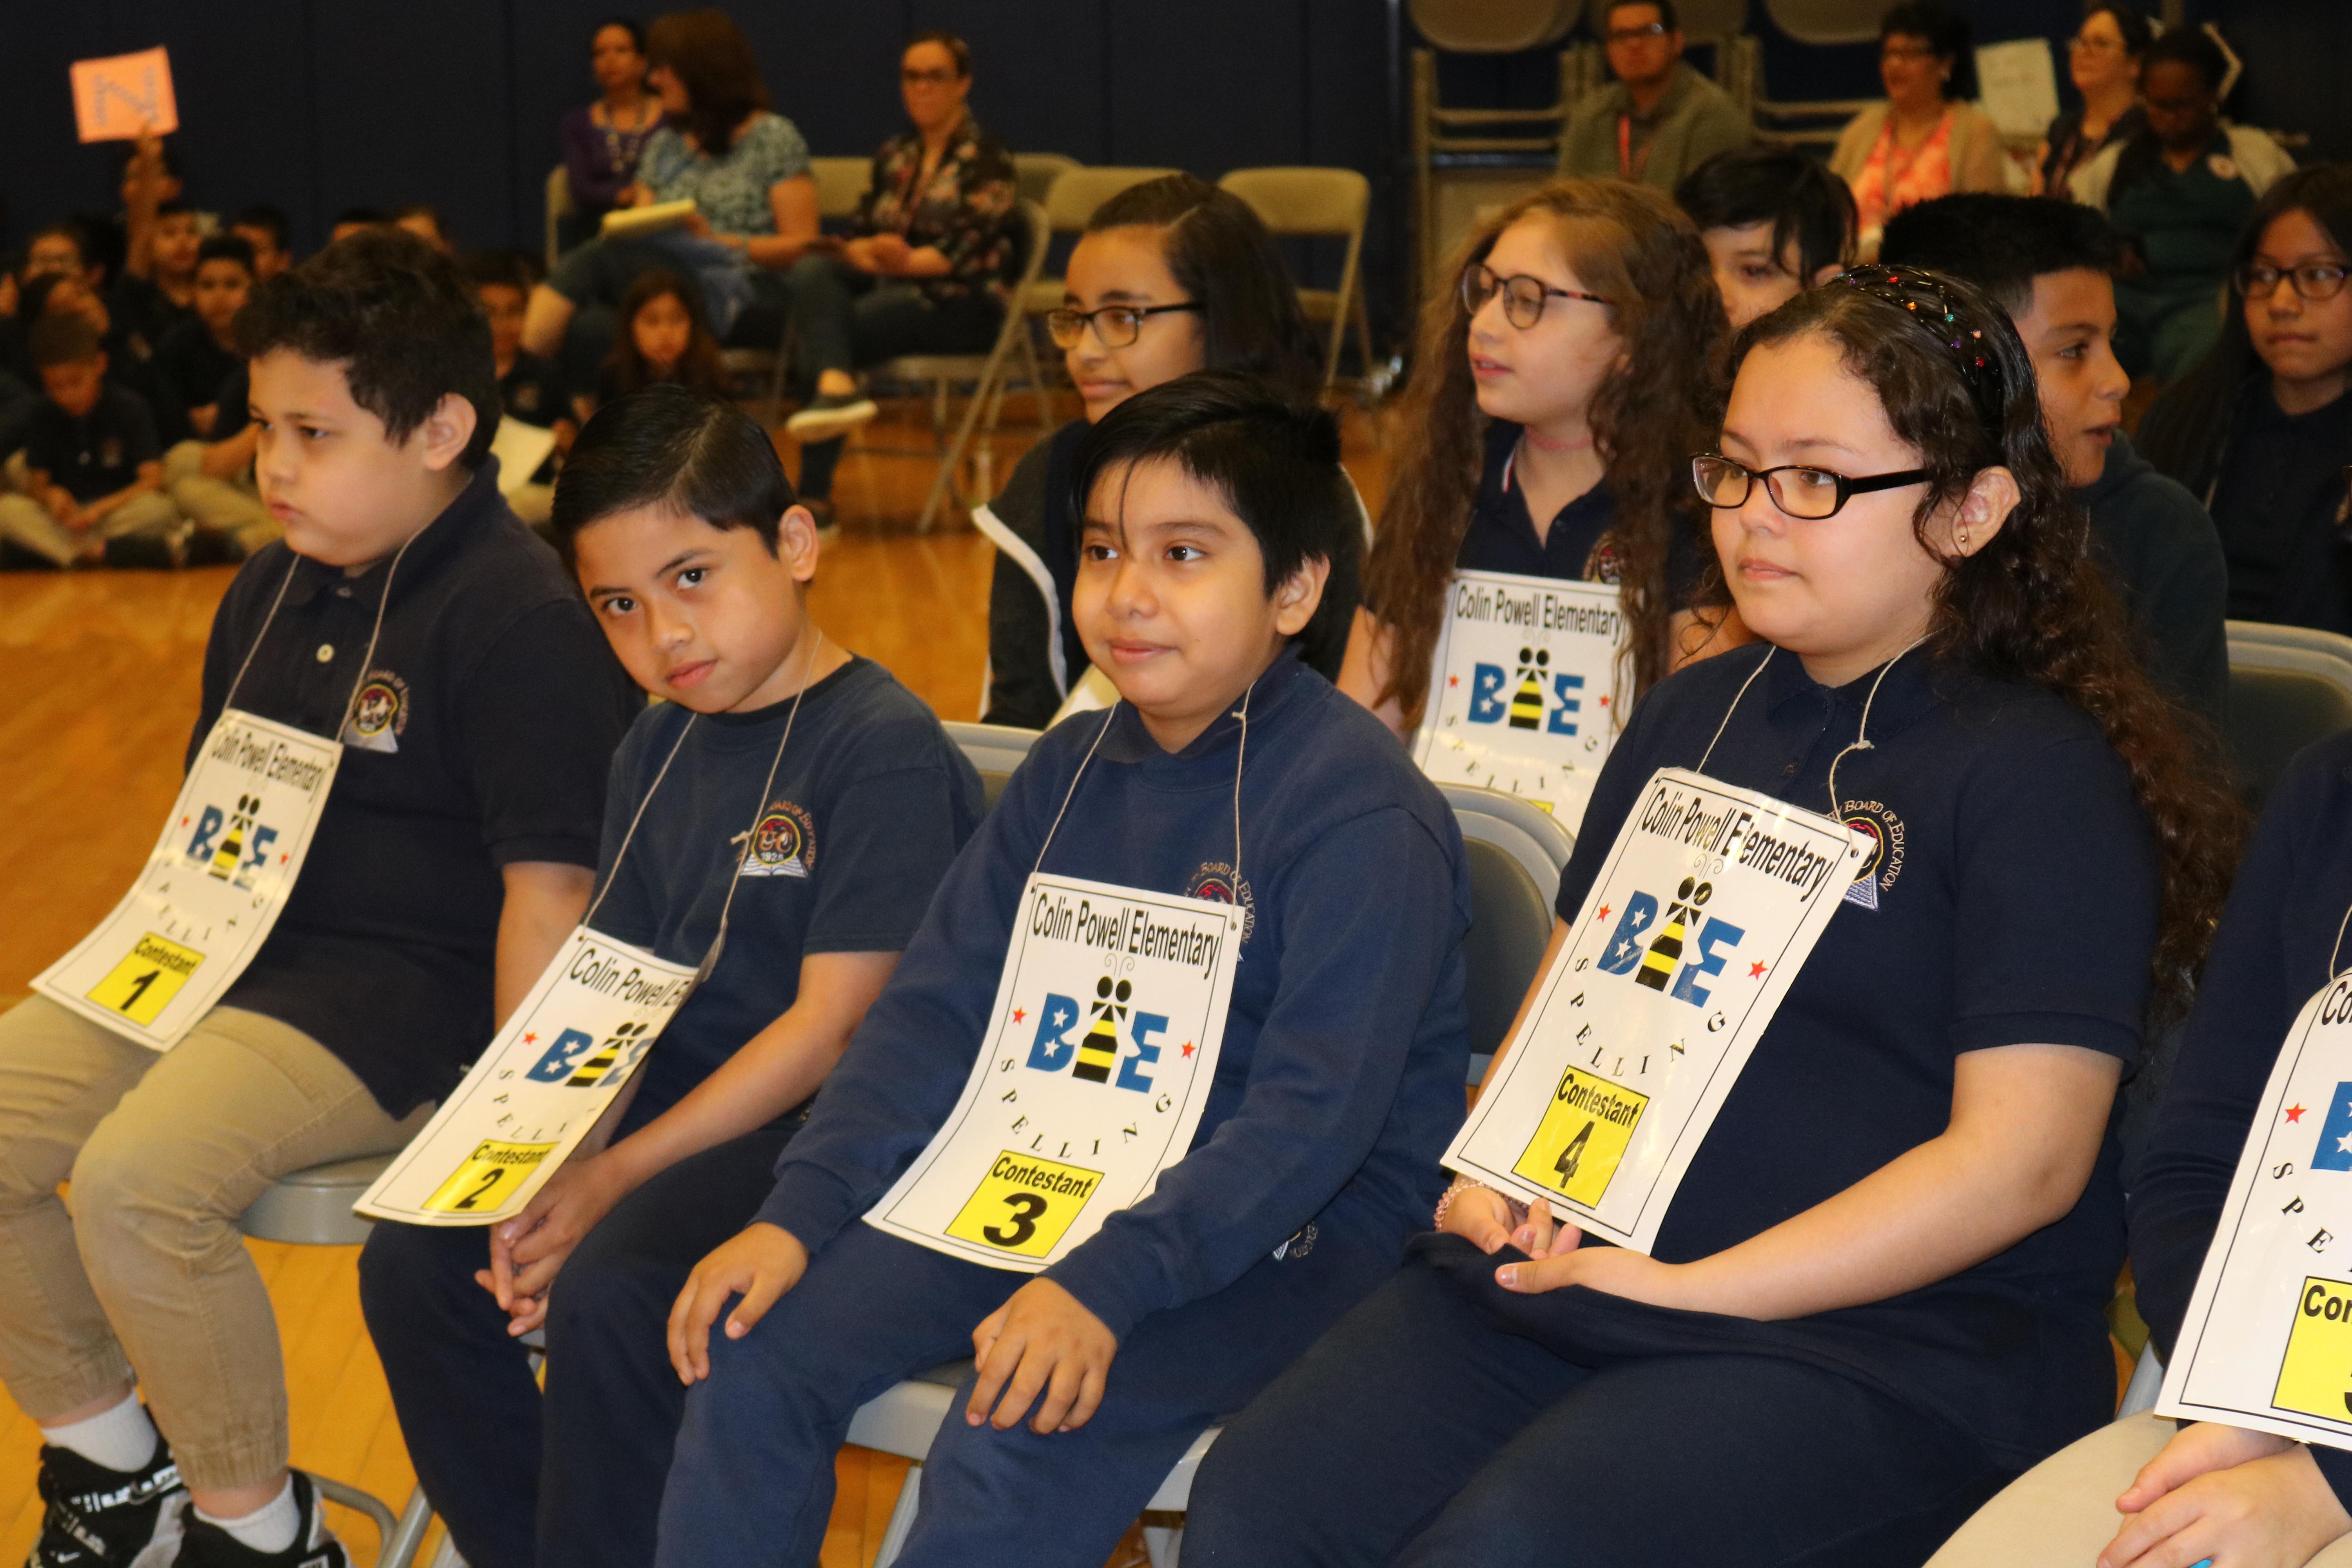 spelling bee contestants seated in chairs